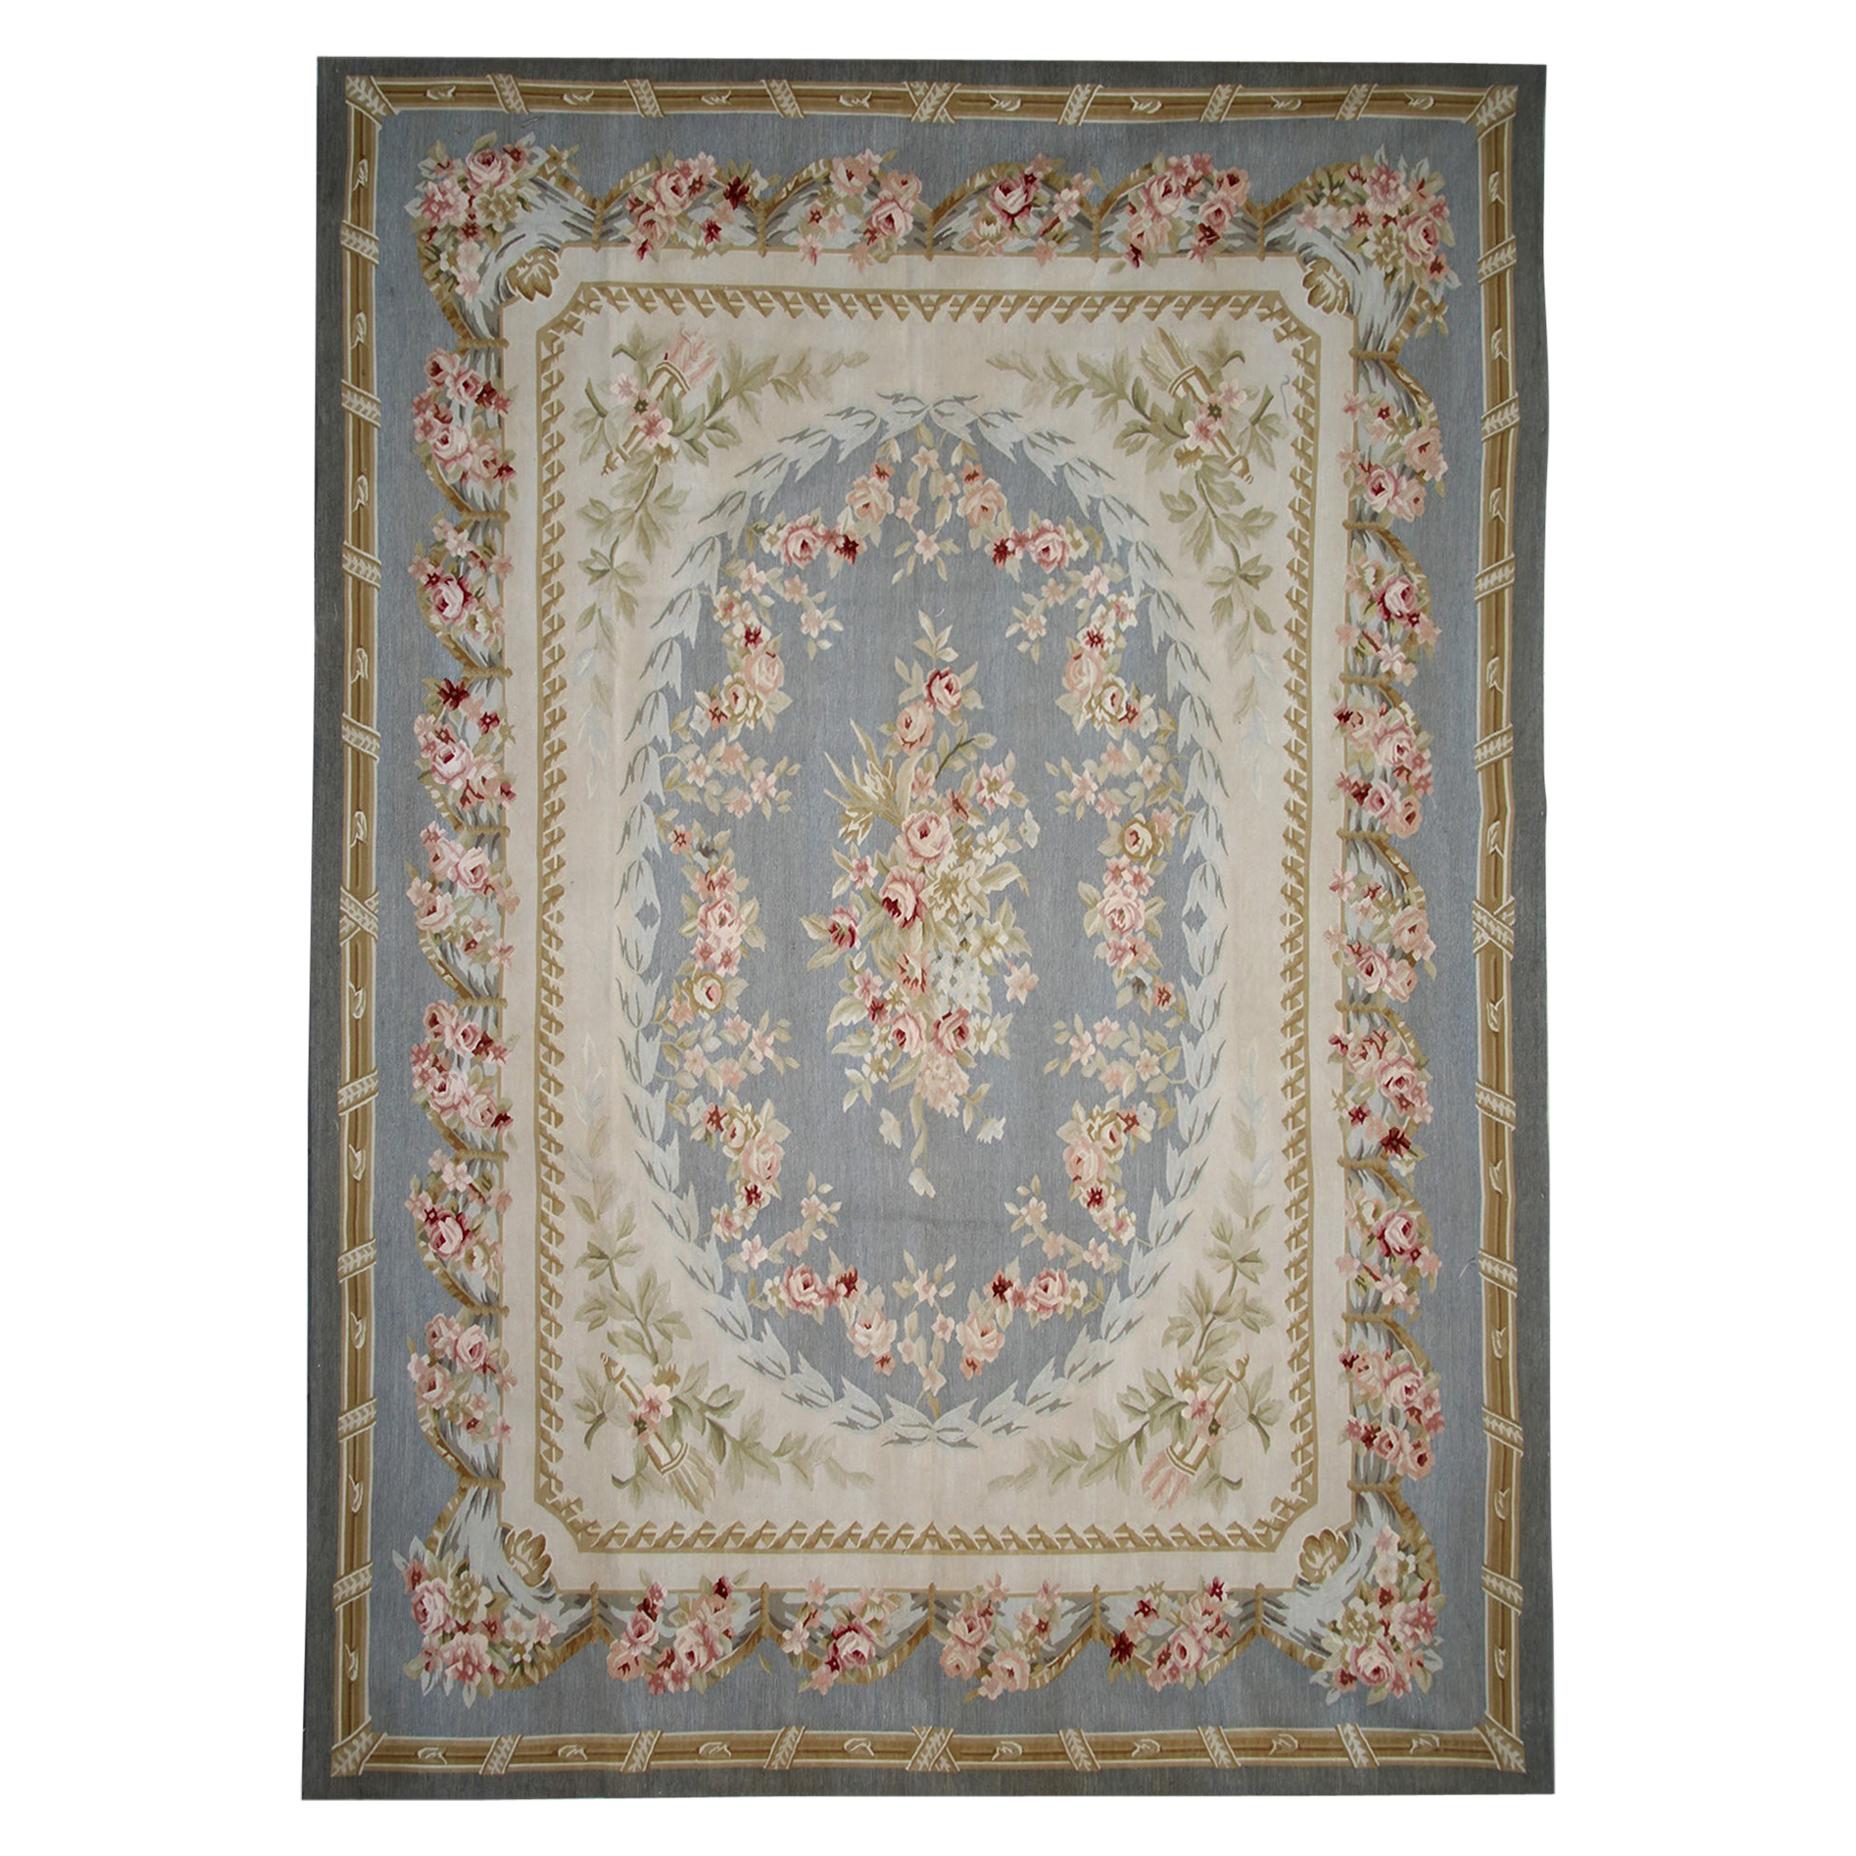 Vintage Aubusson Style Rug Tapestry, Blue Floral Needlepoint Country Home Decor For Sale